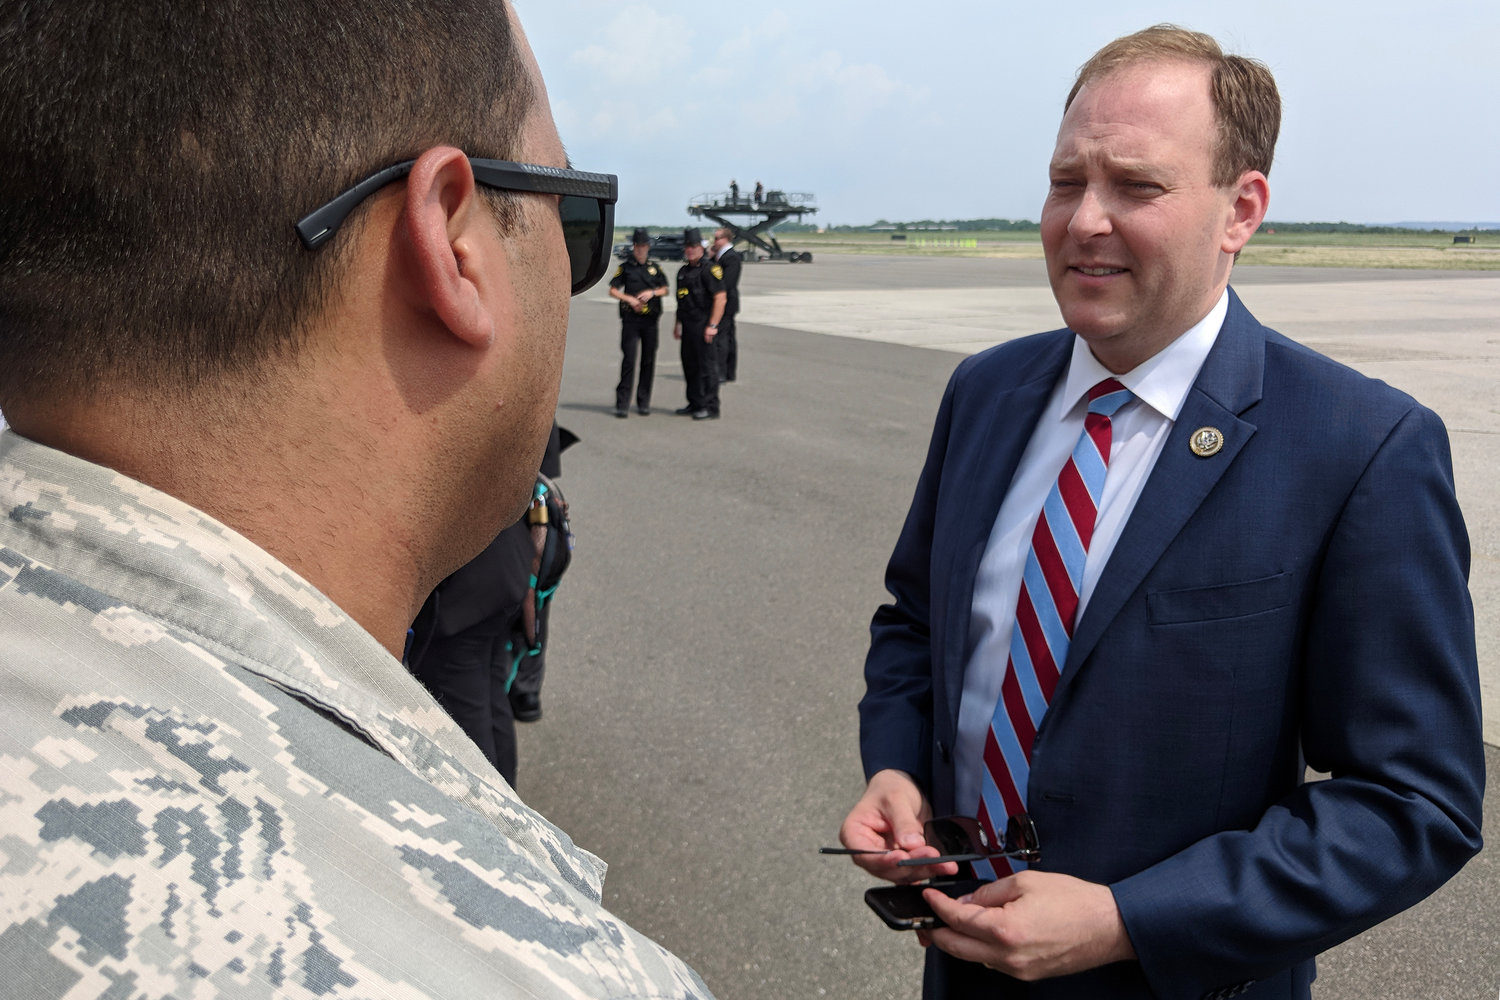 The campaign for Republican candidate Lee Zeldin began gaining momentum in the month before the gubernatorial election.